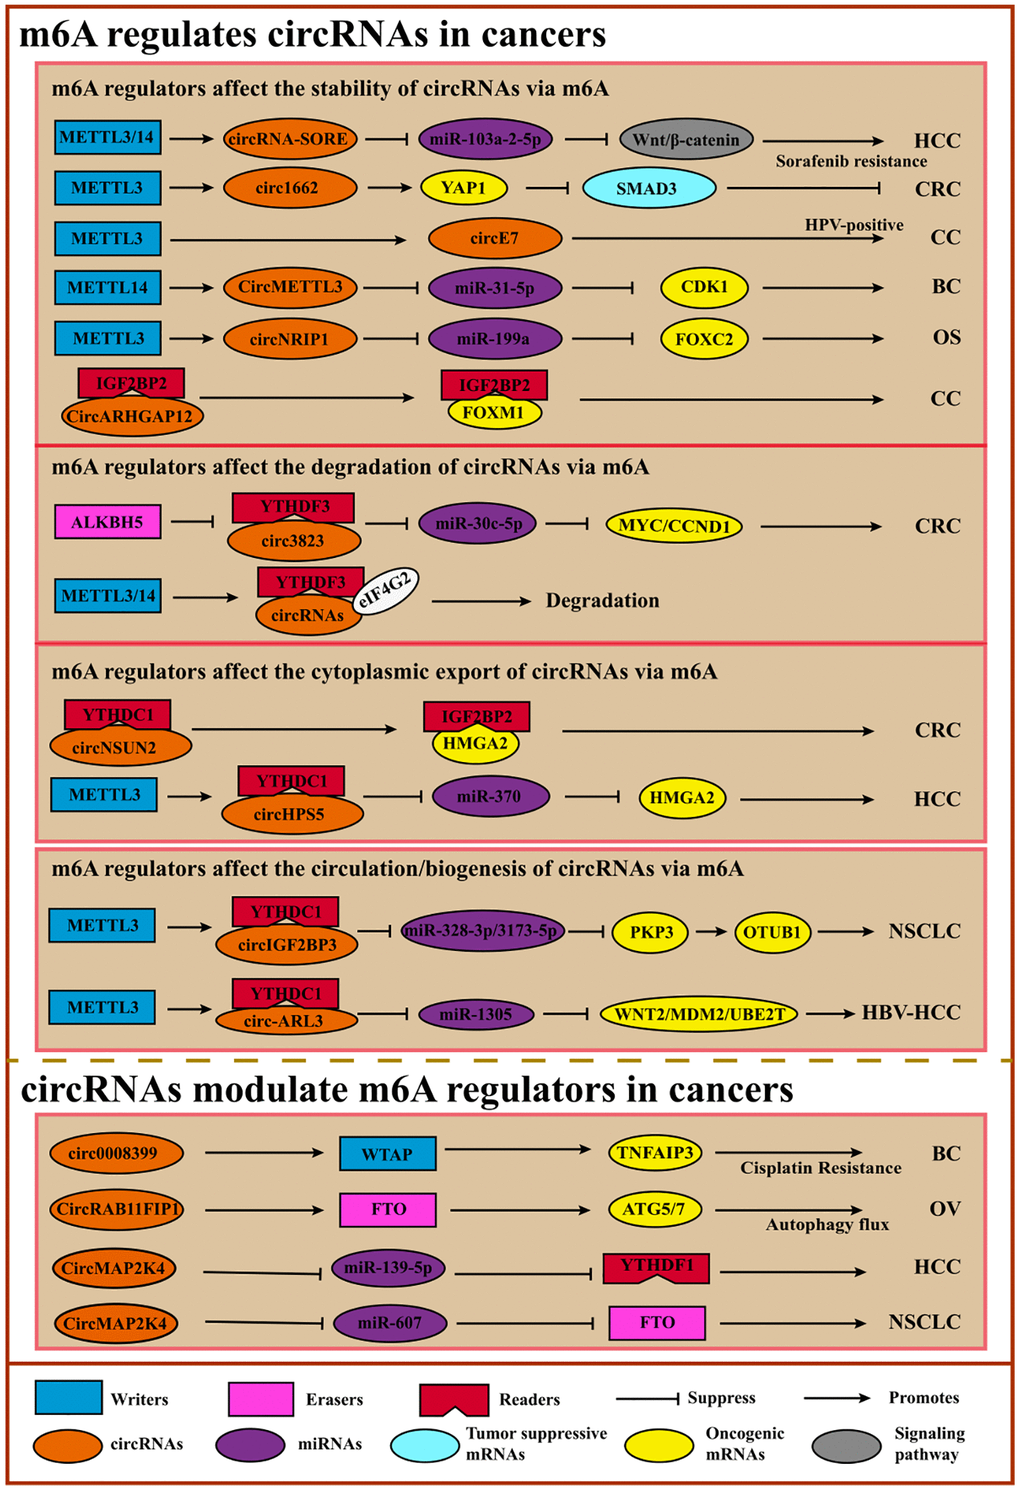 Crosstalk between m6A and circRNAs. m6A facilitates the circulation, accumulation, translocation, translation, or degradation of circRNA to promote or suppress cancers via diverse cancer-associated signaling pathways or tumor-related oncogene/suppressors. On the contrary, circRNAs regulate m6A regulators like lncRNAs.